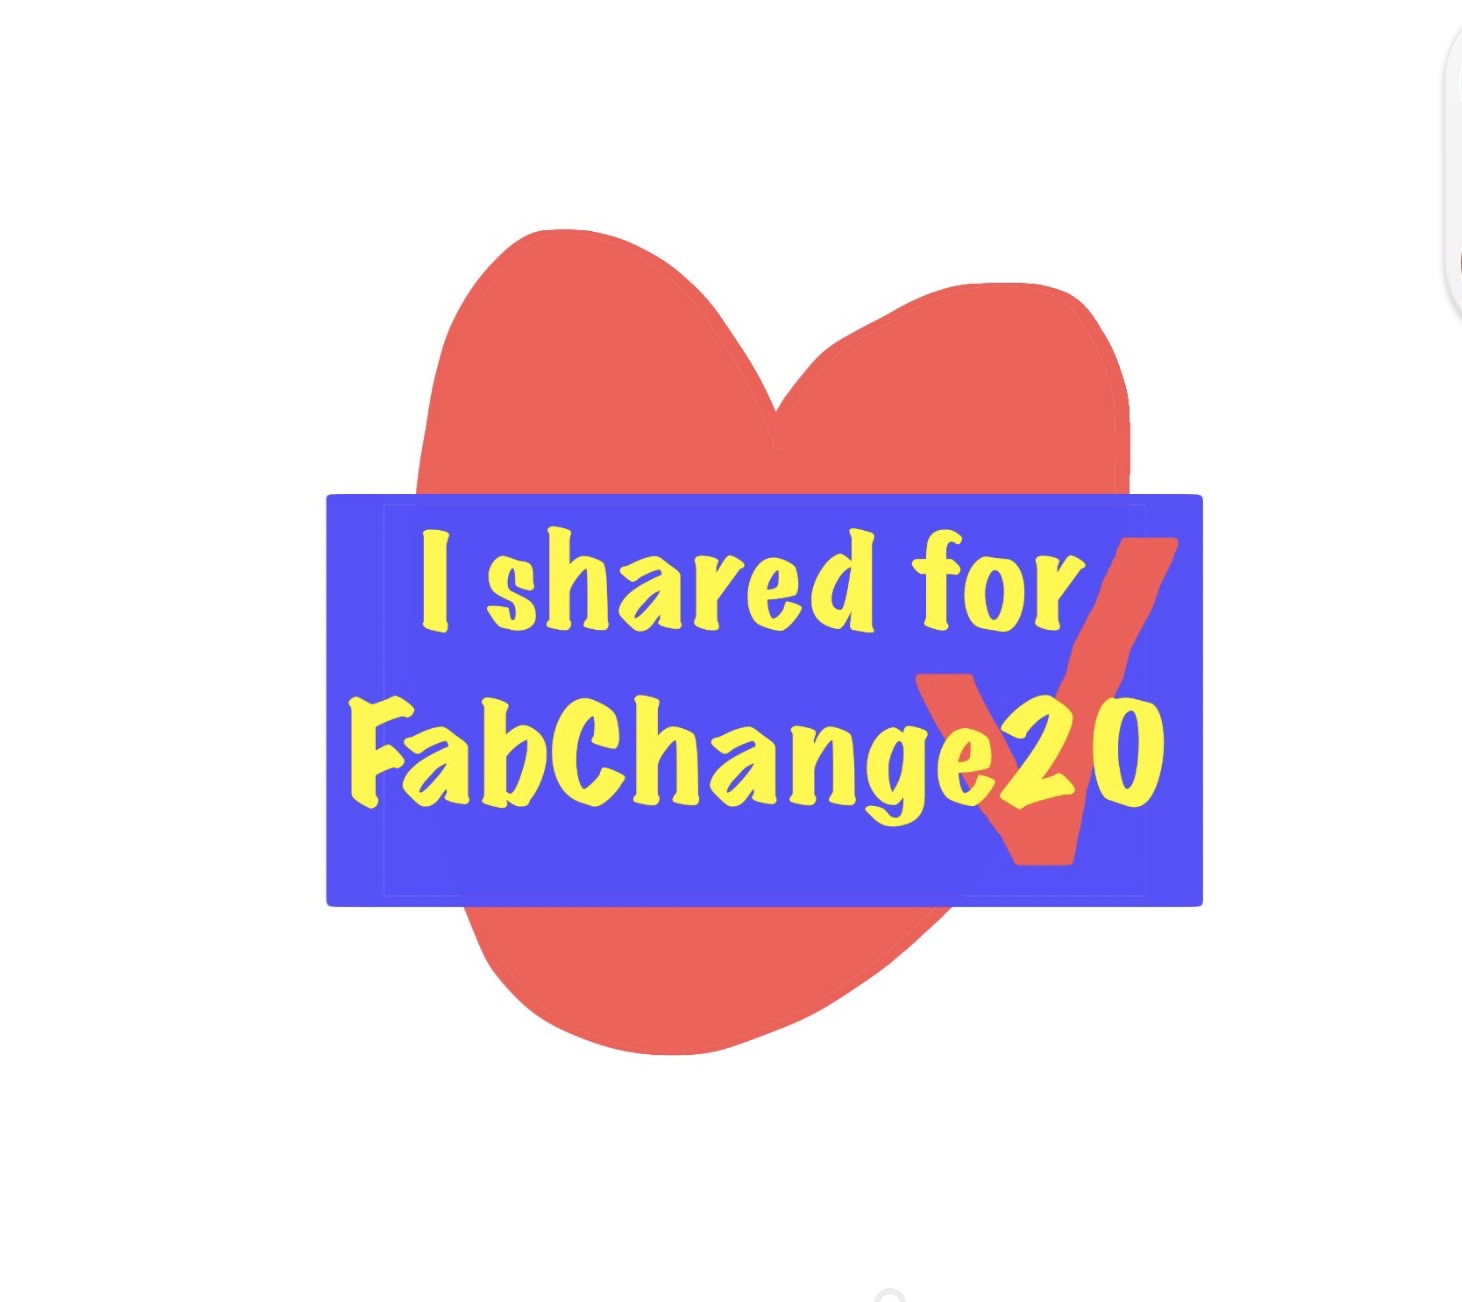 #FabChange20 next steps and getting involved - all you need to know to share and participate featured image